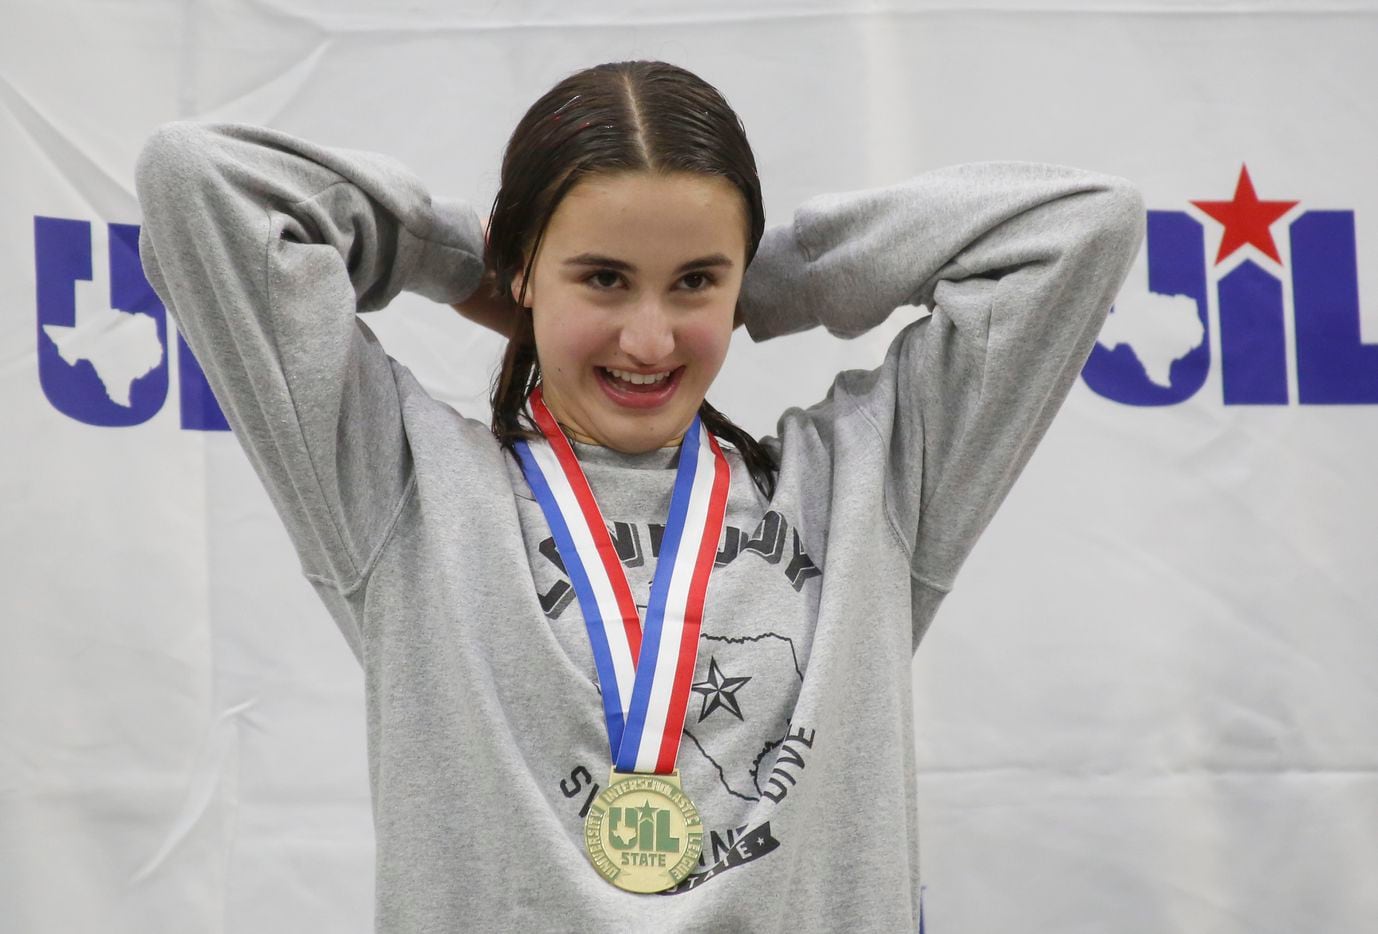 Lucas Lovejoy diver Maria Faoro sports a smile after being awarded her first place medal in...